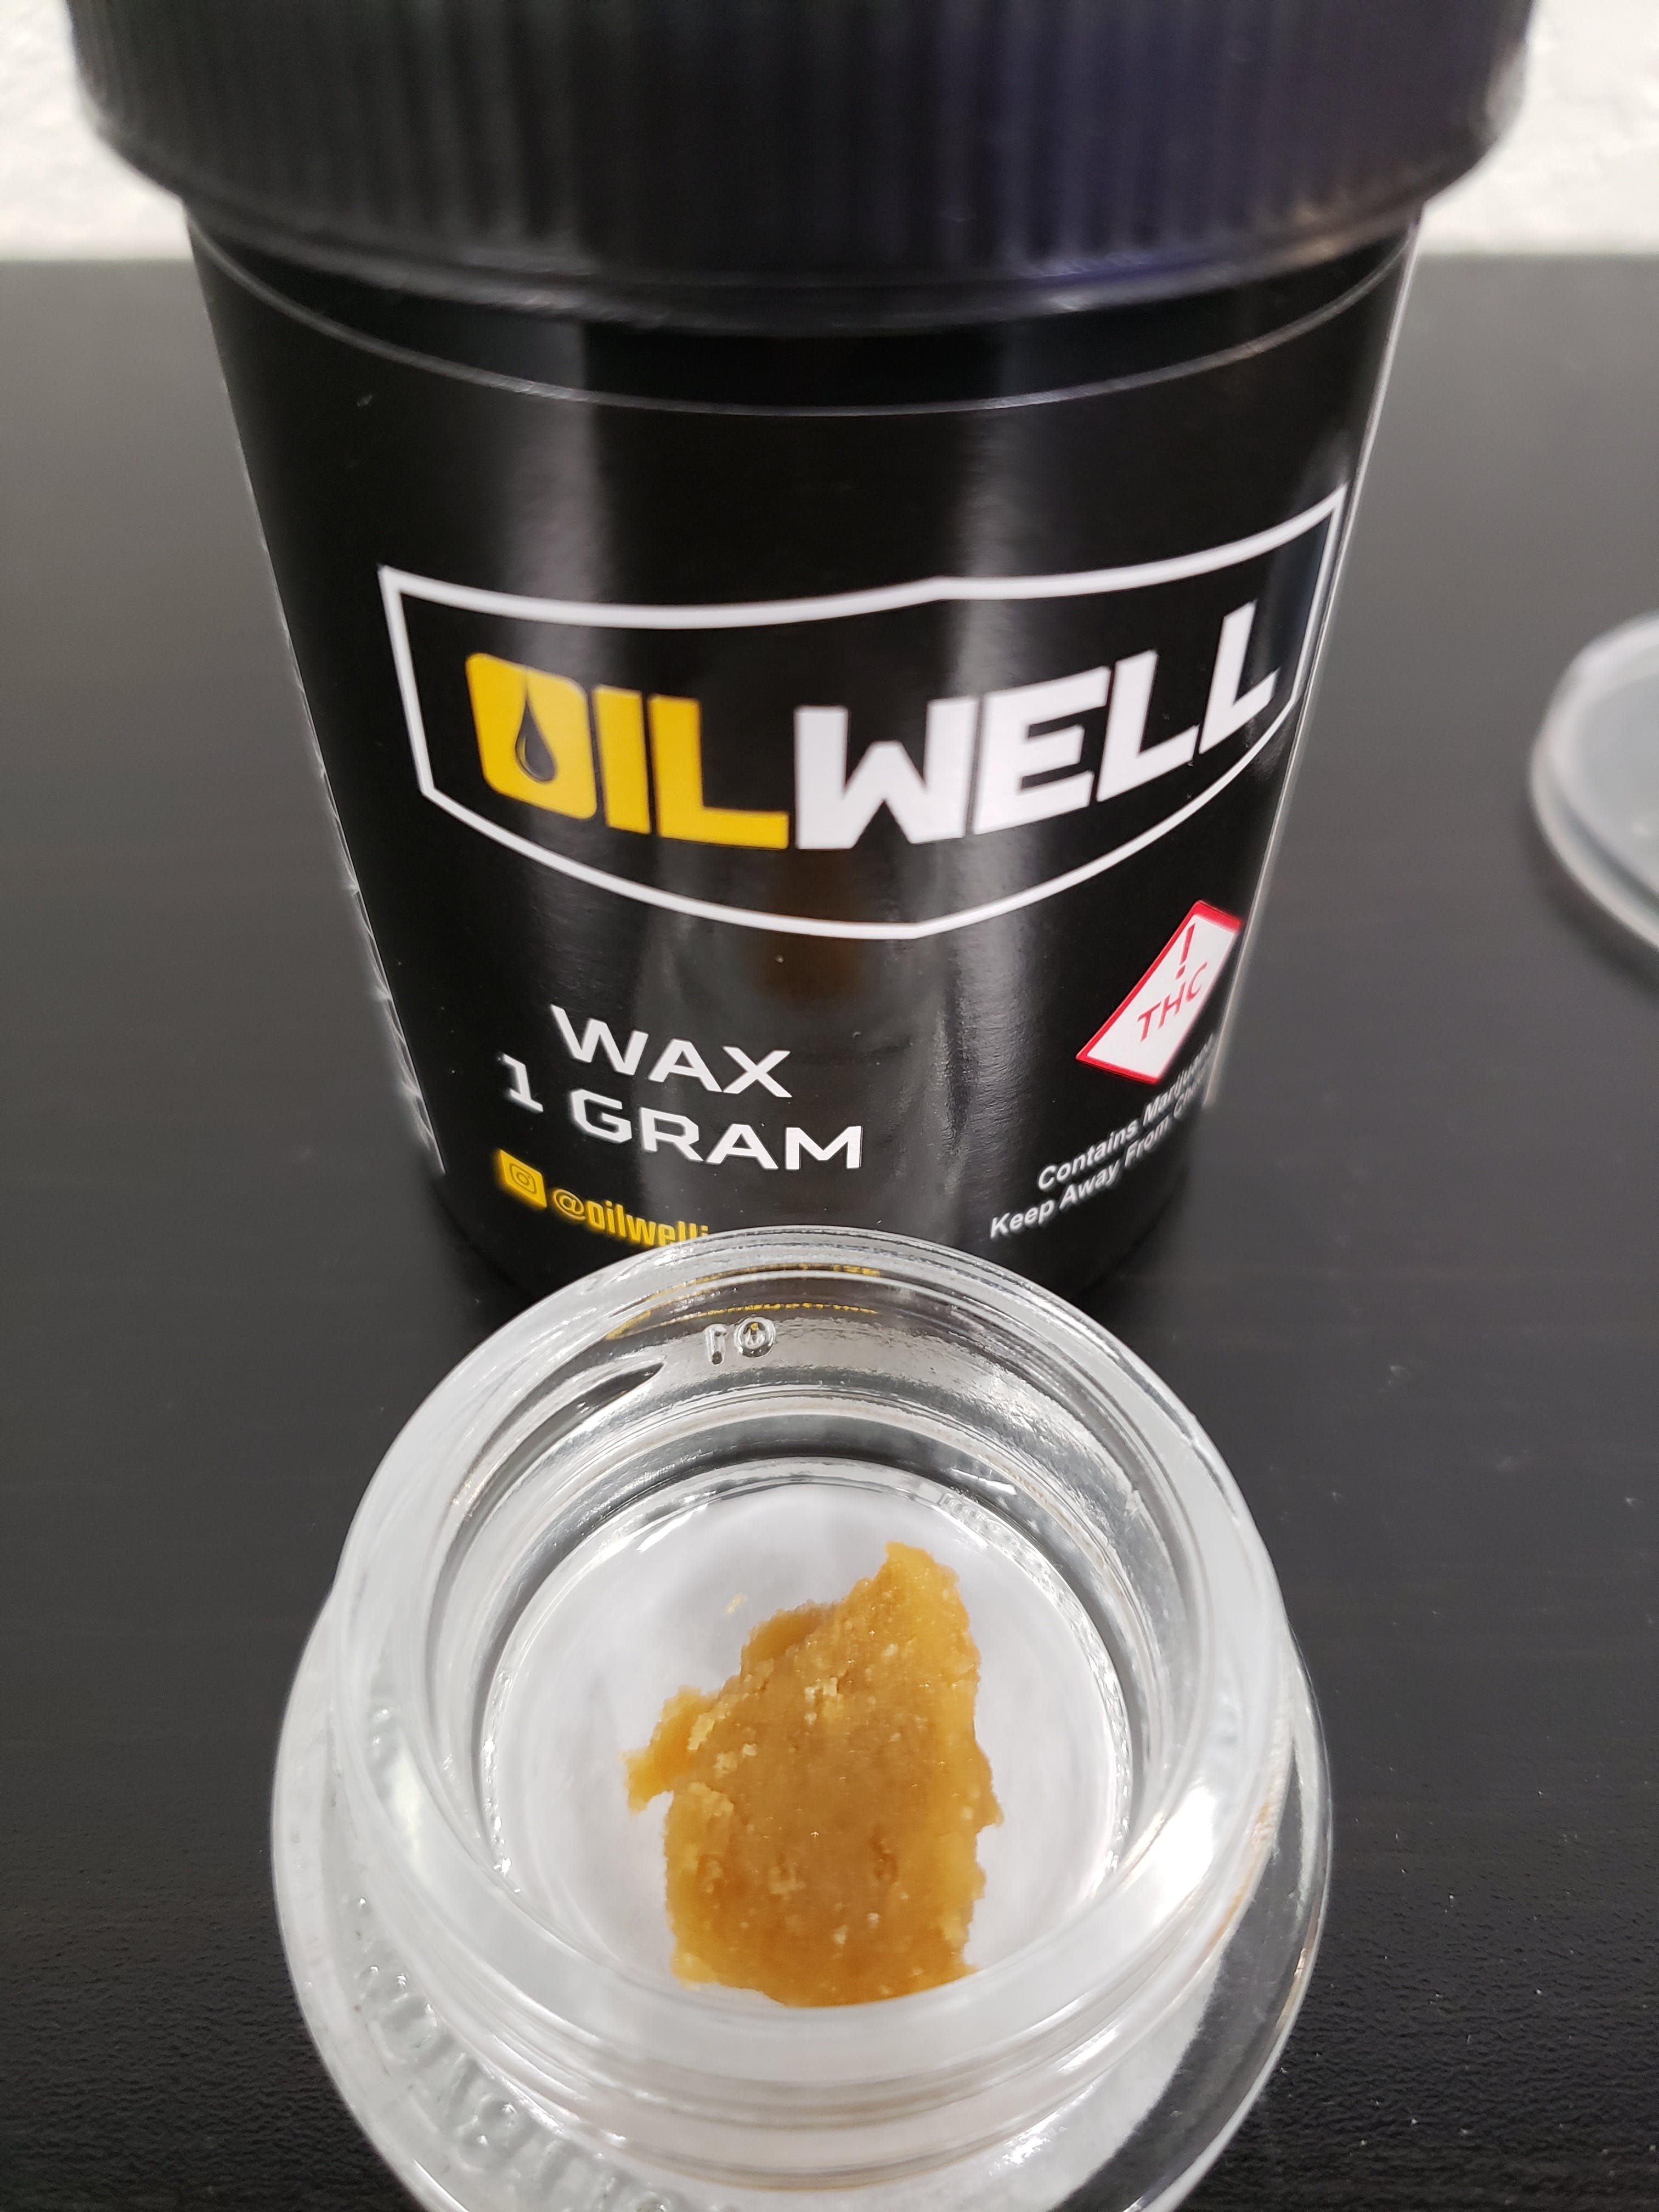 marijuana-dispensaries-the-epic-remedy-fillmore-in-colorado-springs-oil-well-wax